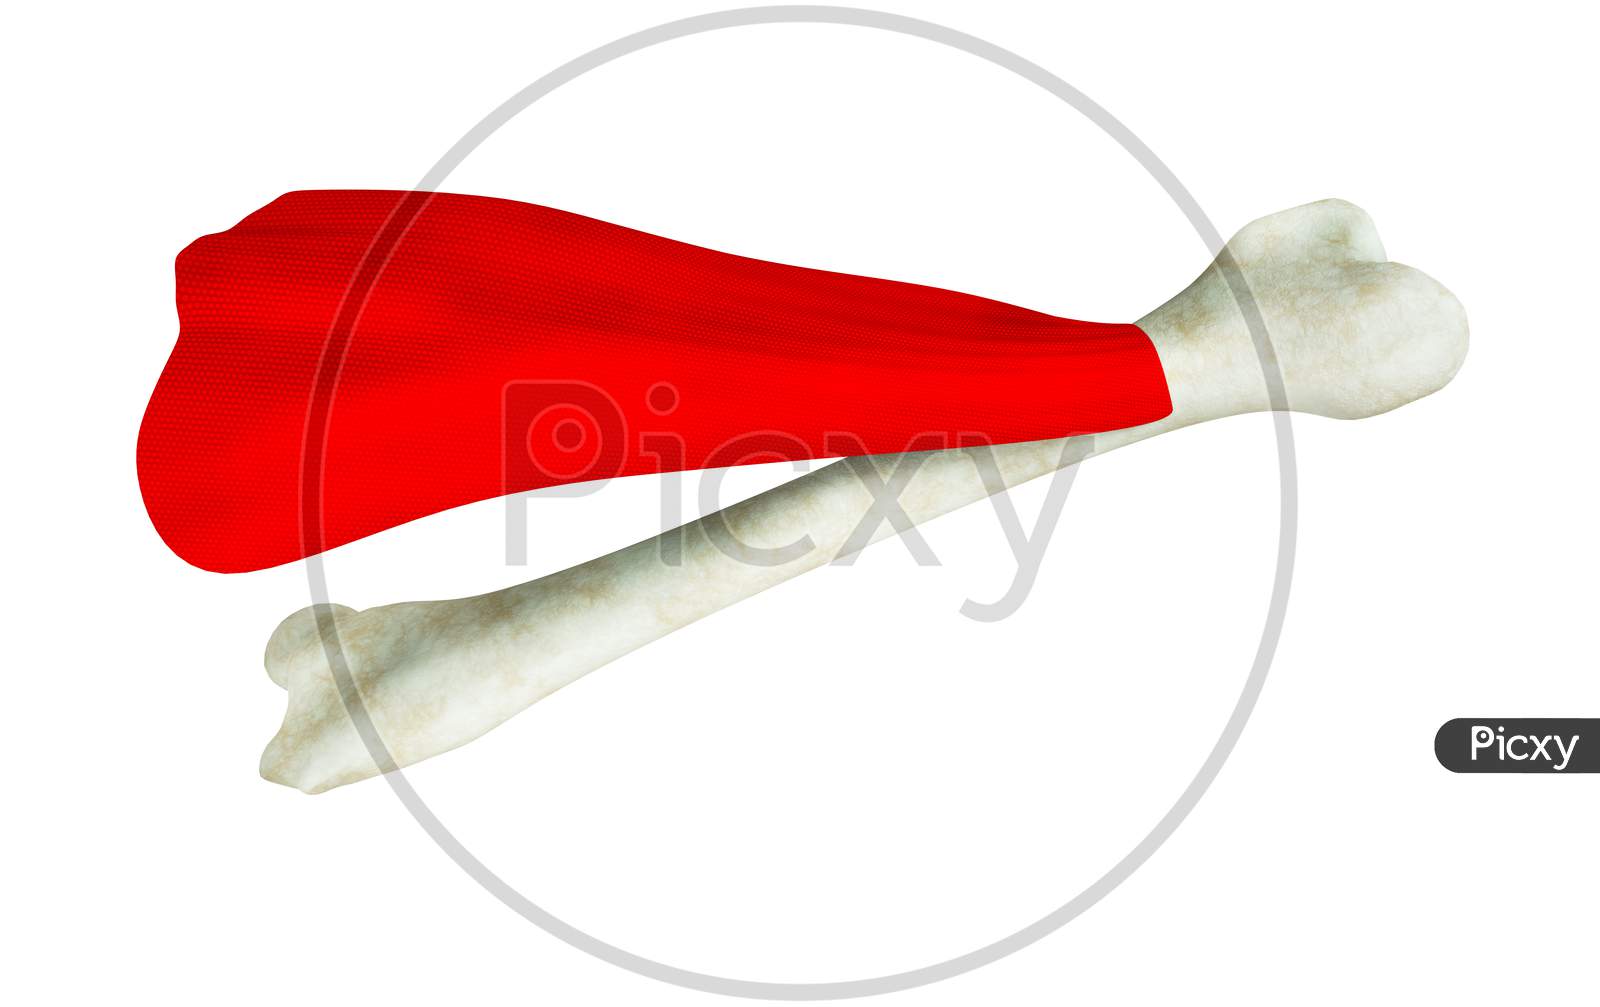 Human Thigh Bone In Red Superhero Cape On White Background. Osteoporosis World Day Or Power Or Like A Hero Or Confident Or Health Strong Bones Or Awareness And Prevention Concept. 3D Illustration